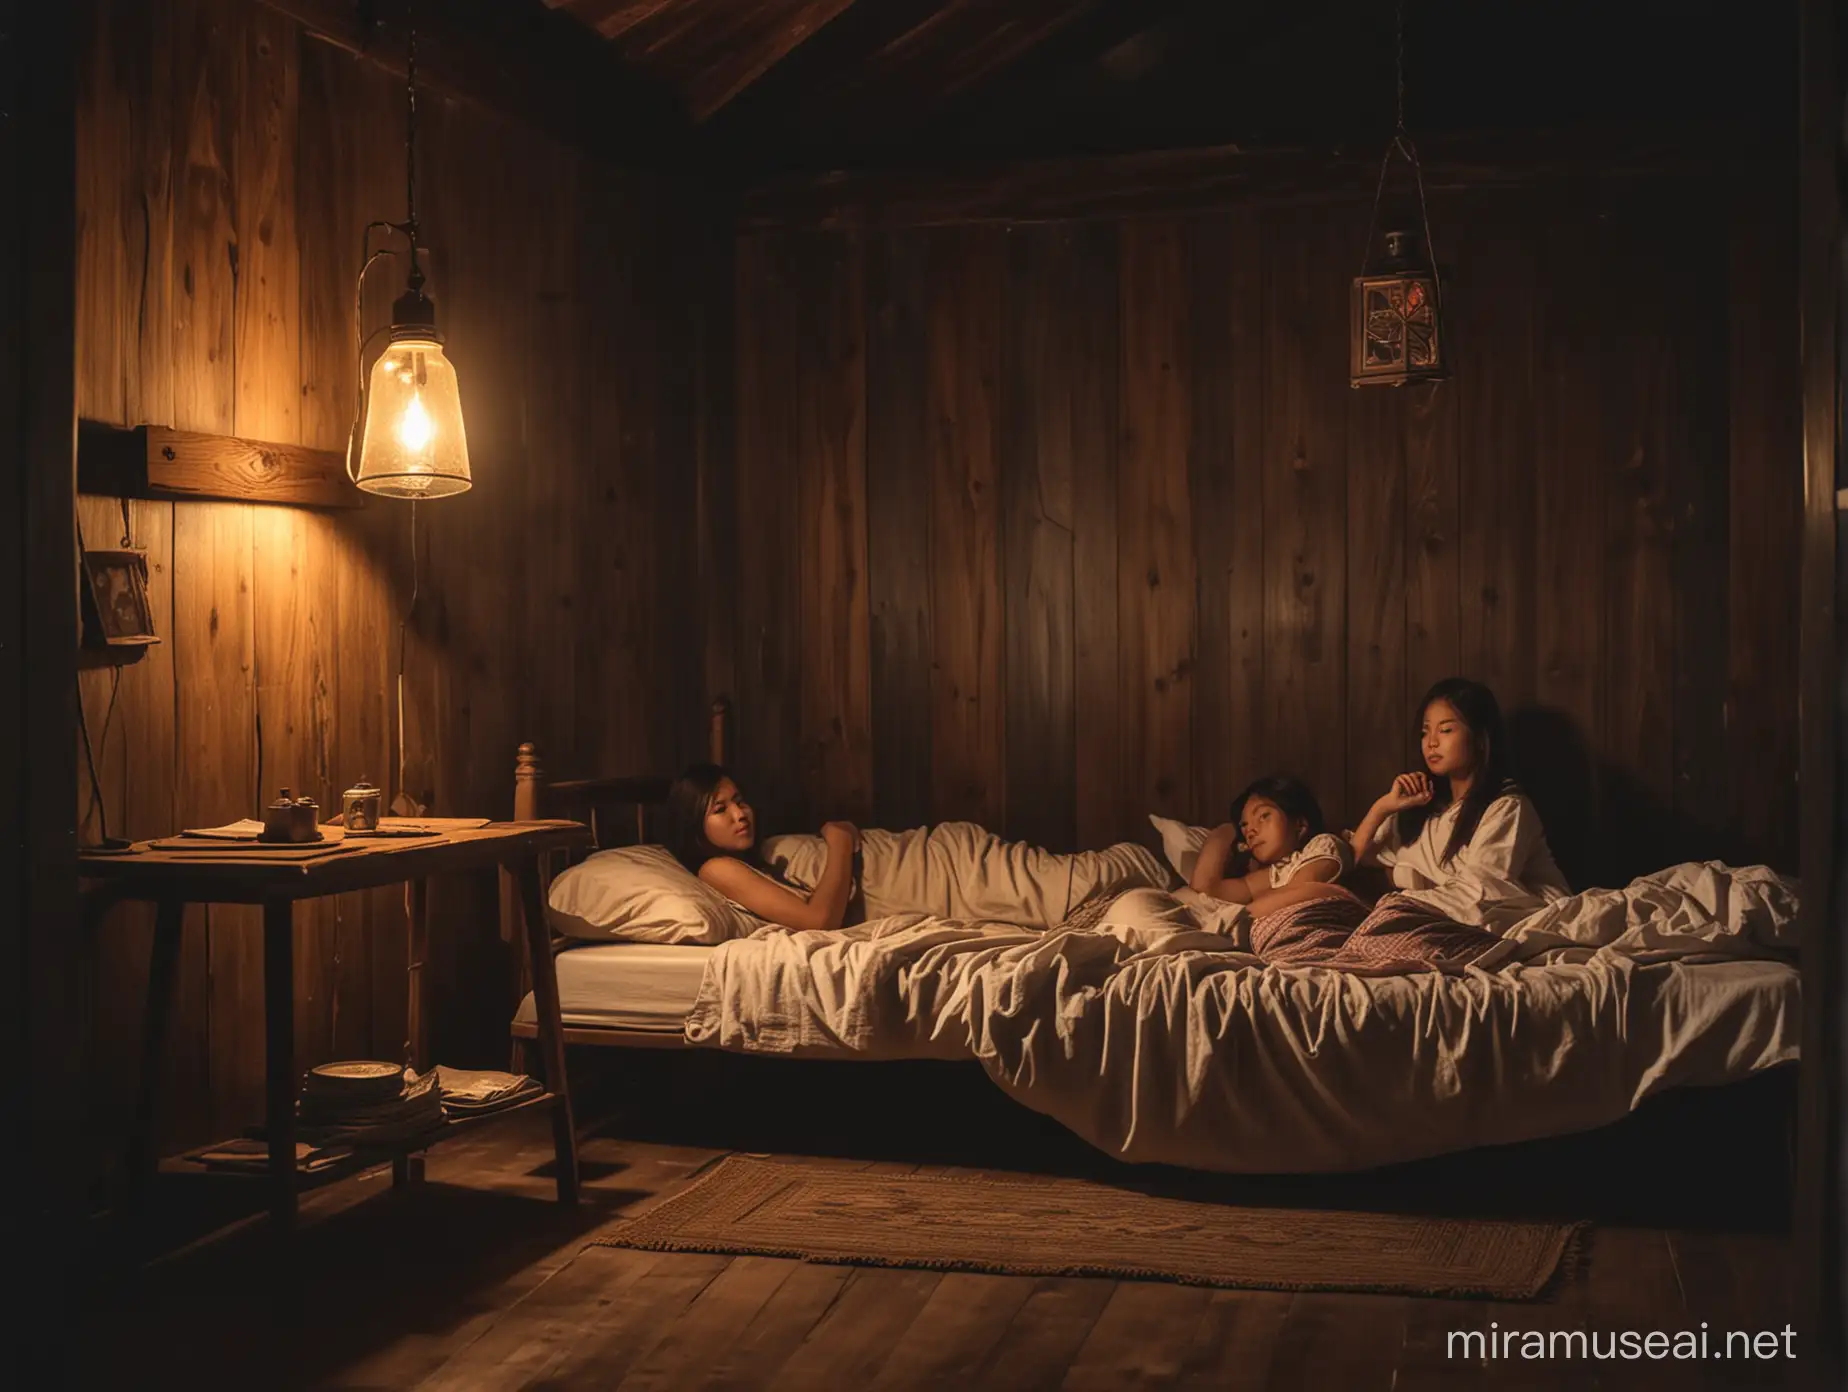 Filipina Slumber Party Cozy Provincial House Ambiance